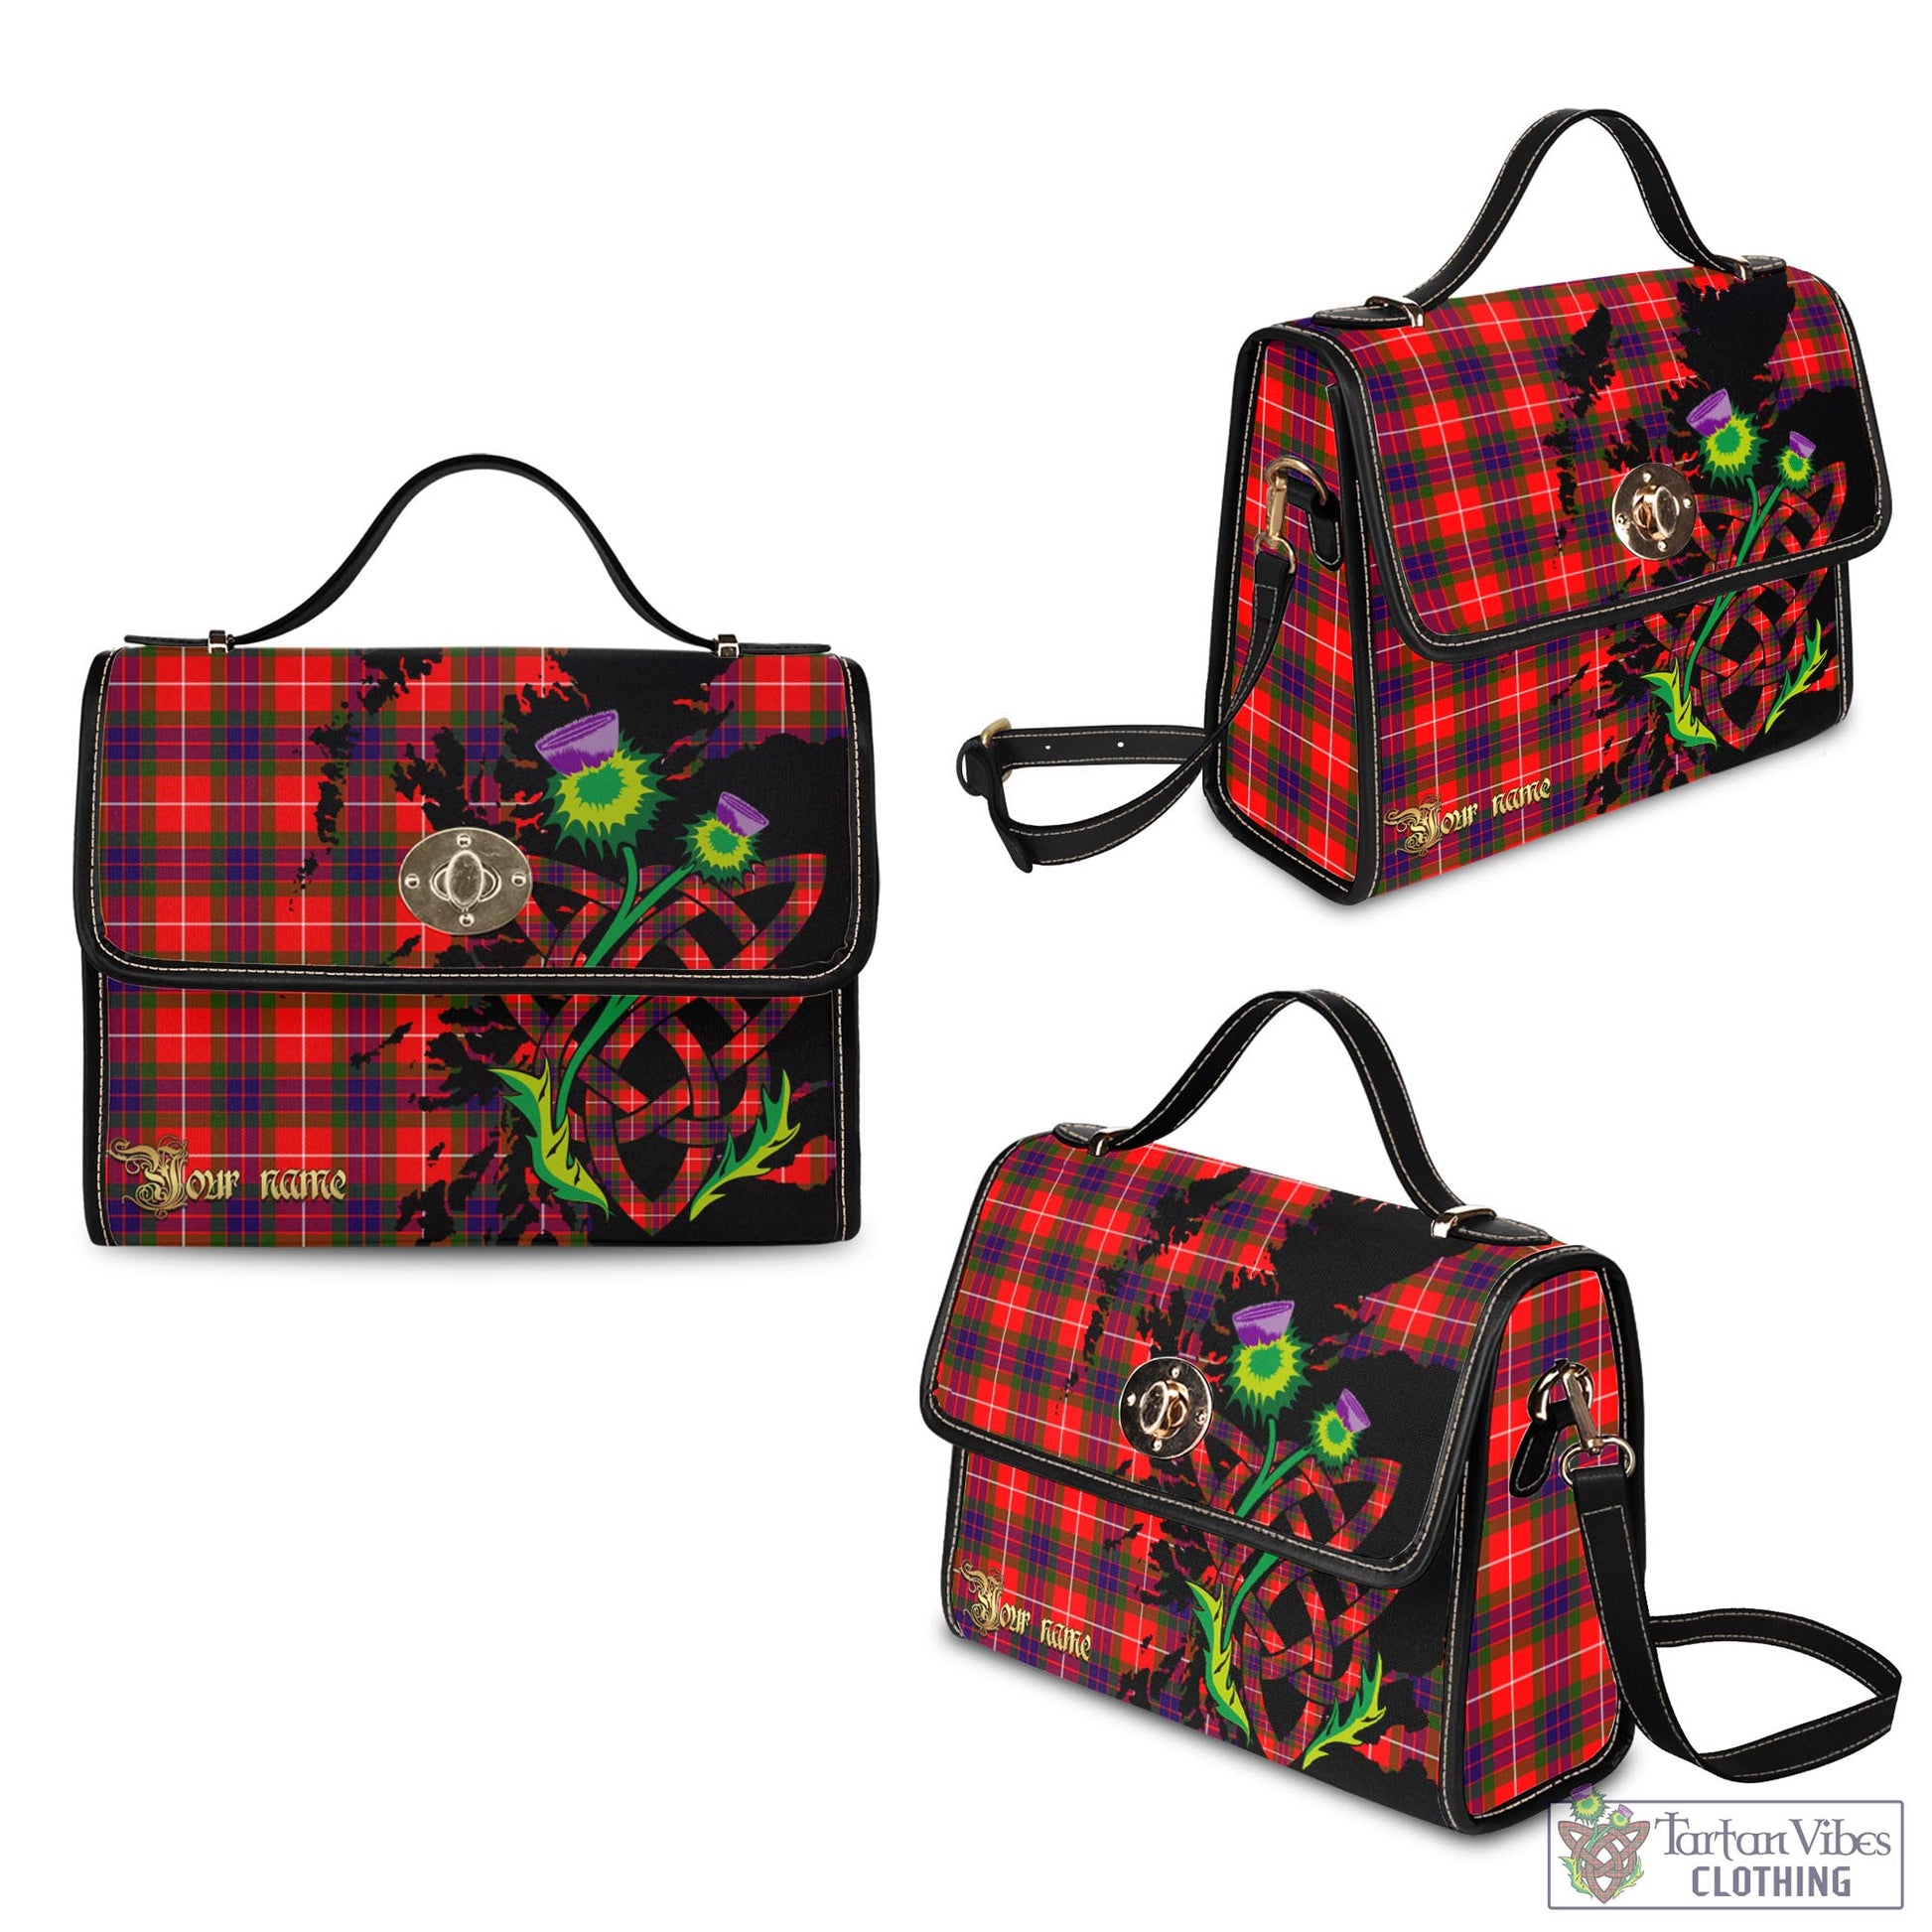 Tartan Vibes Clothing Abernethy Tartan Waterproof Canvas Bag with Scotland Map and Thistle Celtic Accents